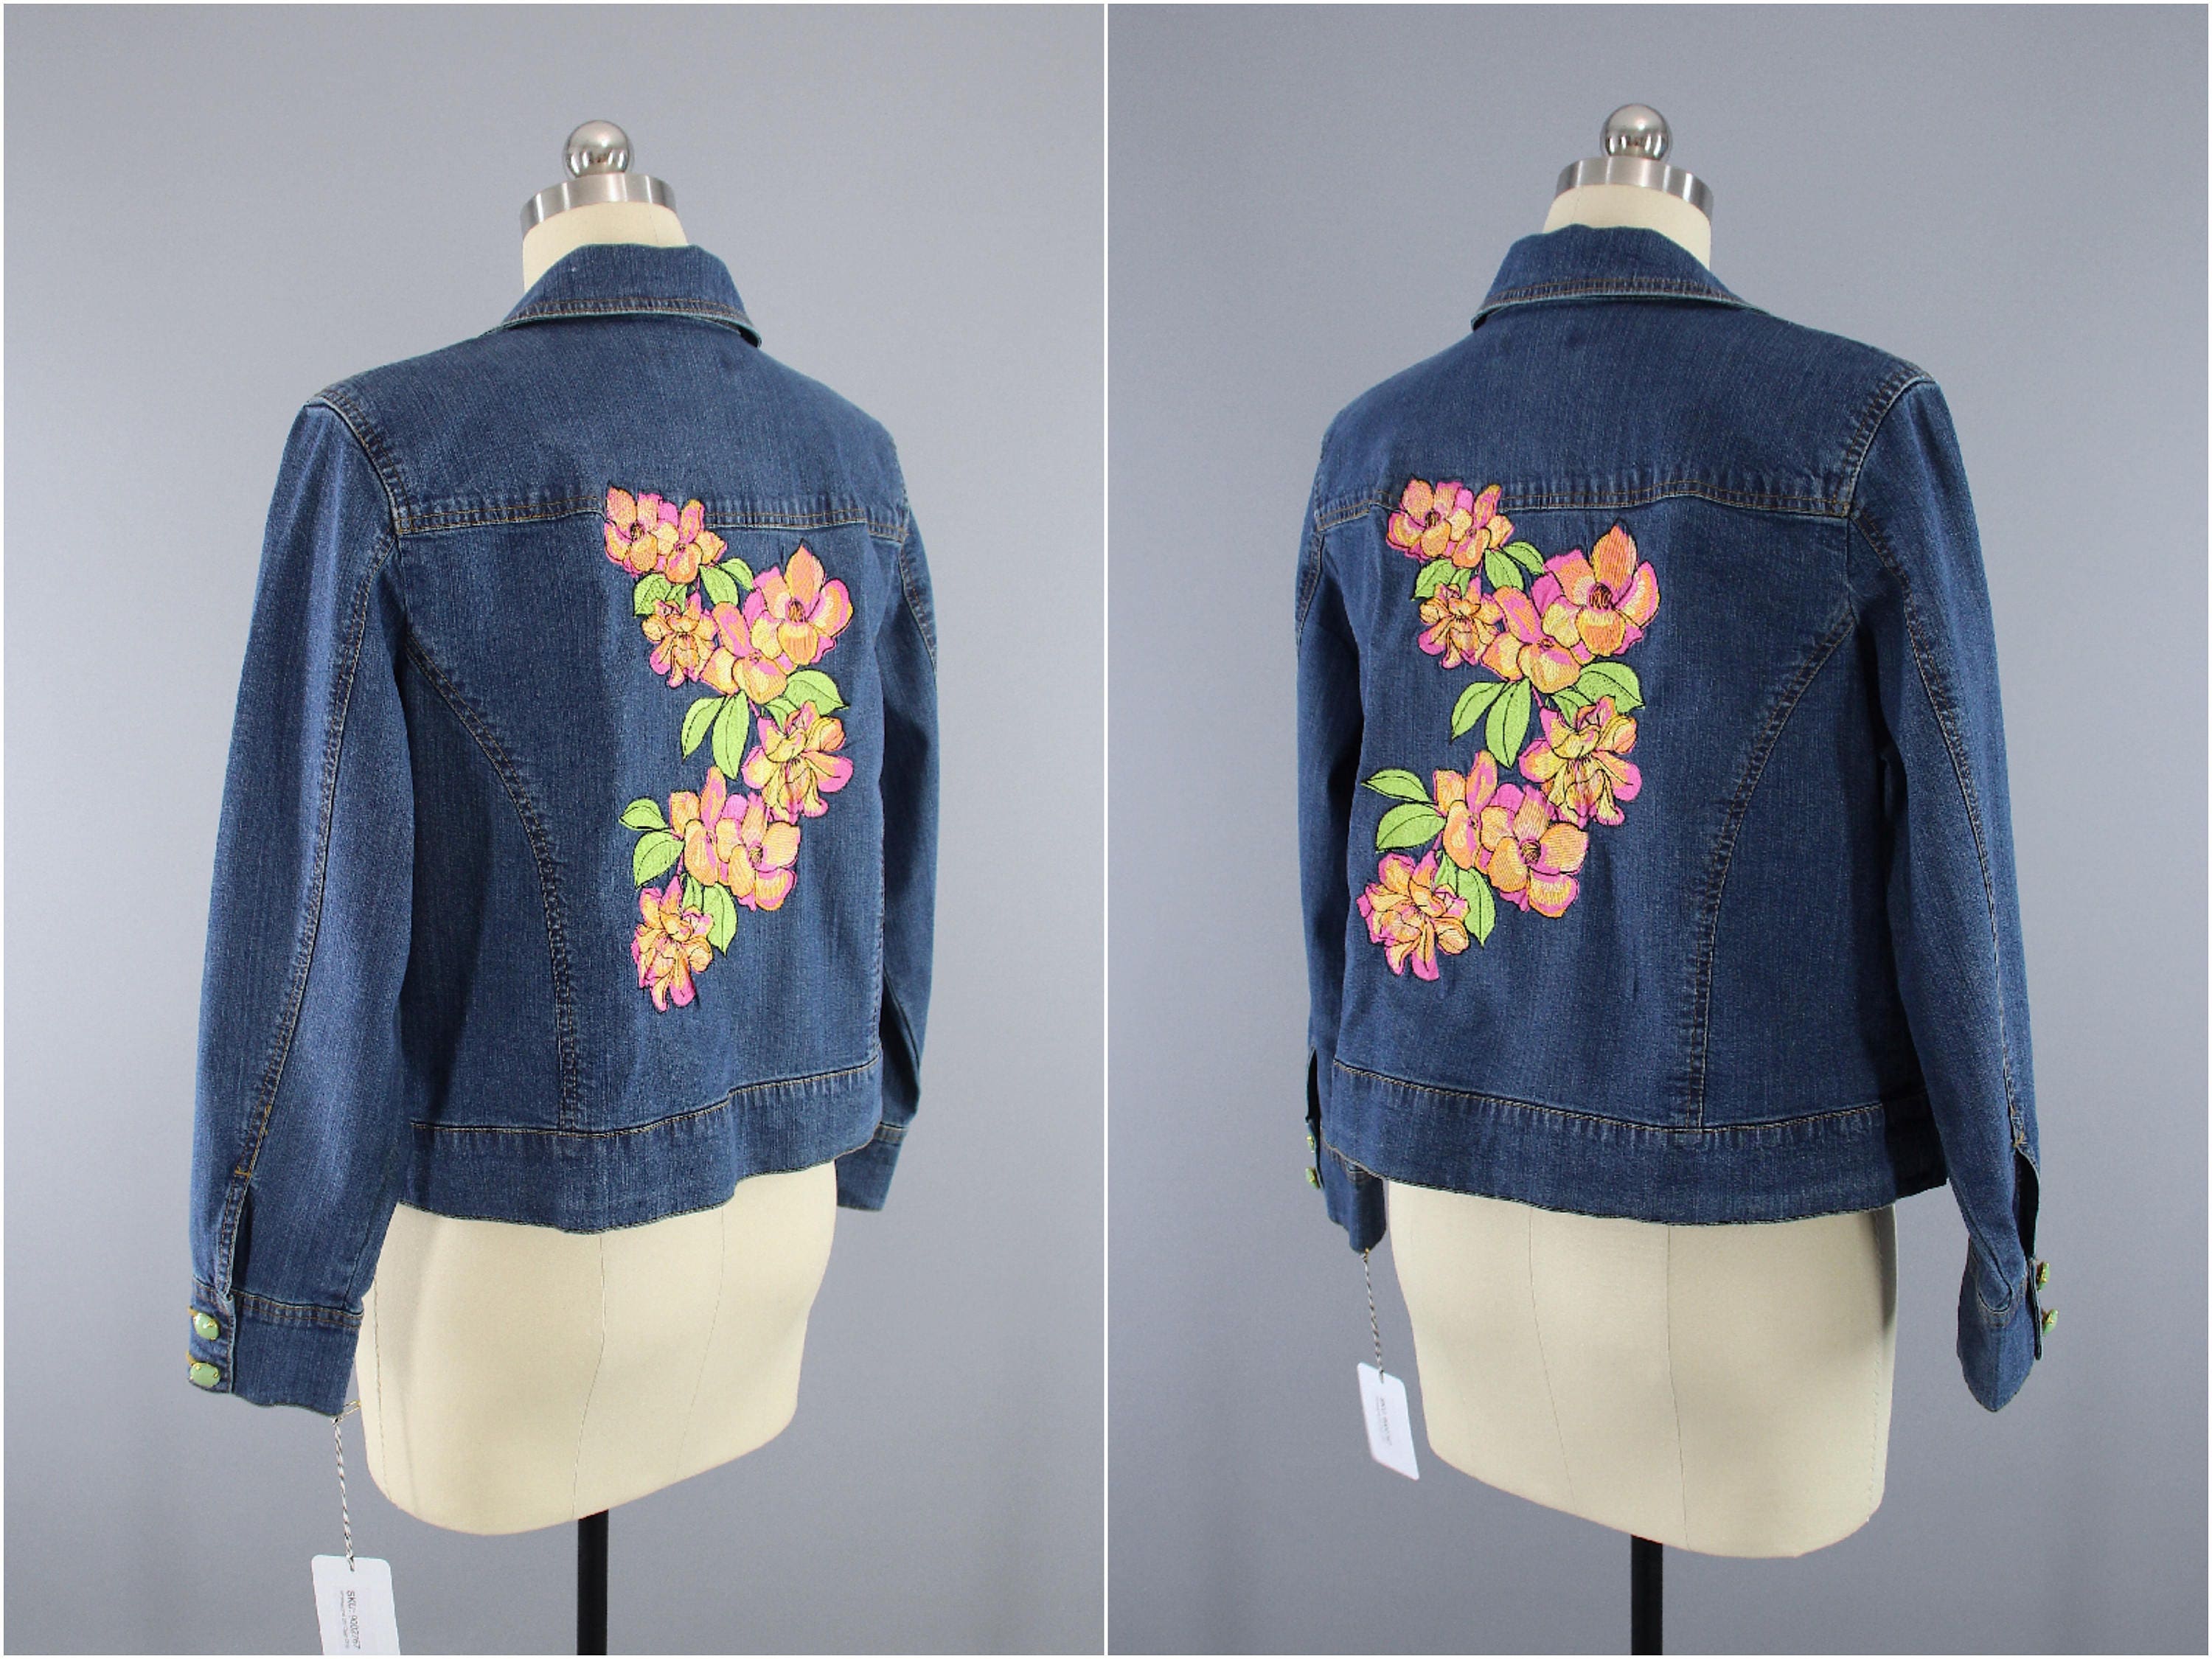 Denim Jean Jacket Embroidered Hawaiian Floral Embroidery | Etsy